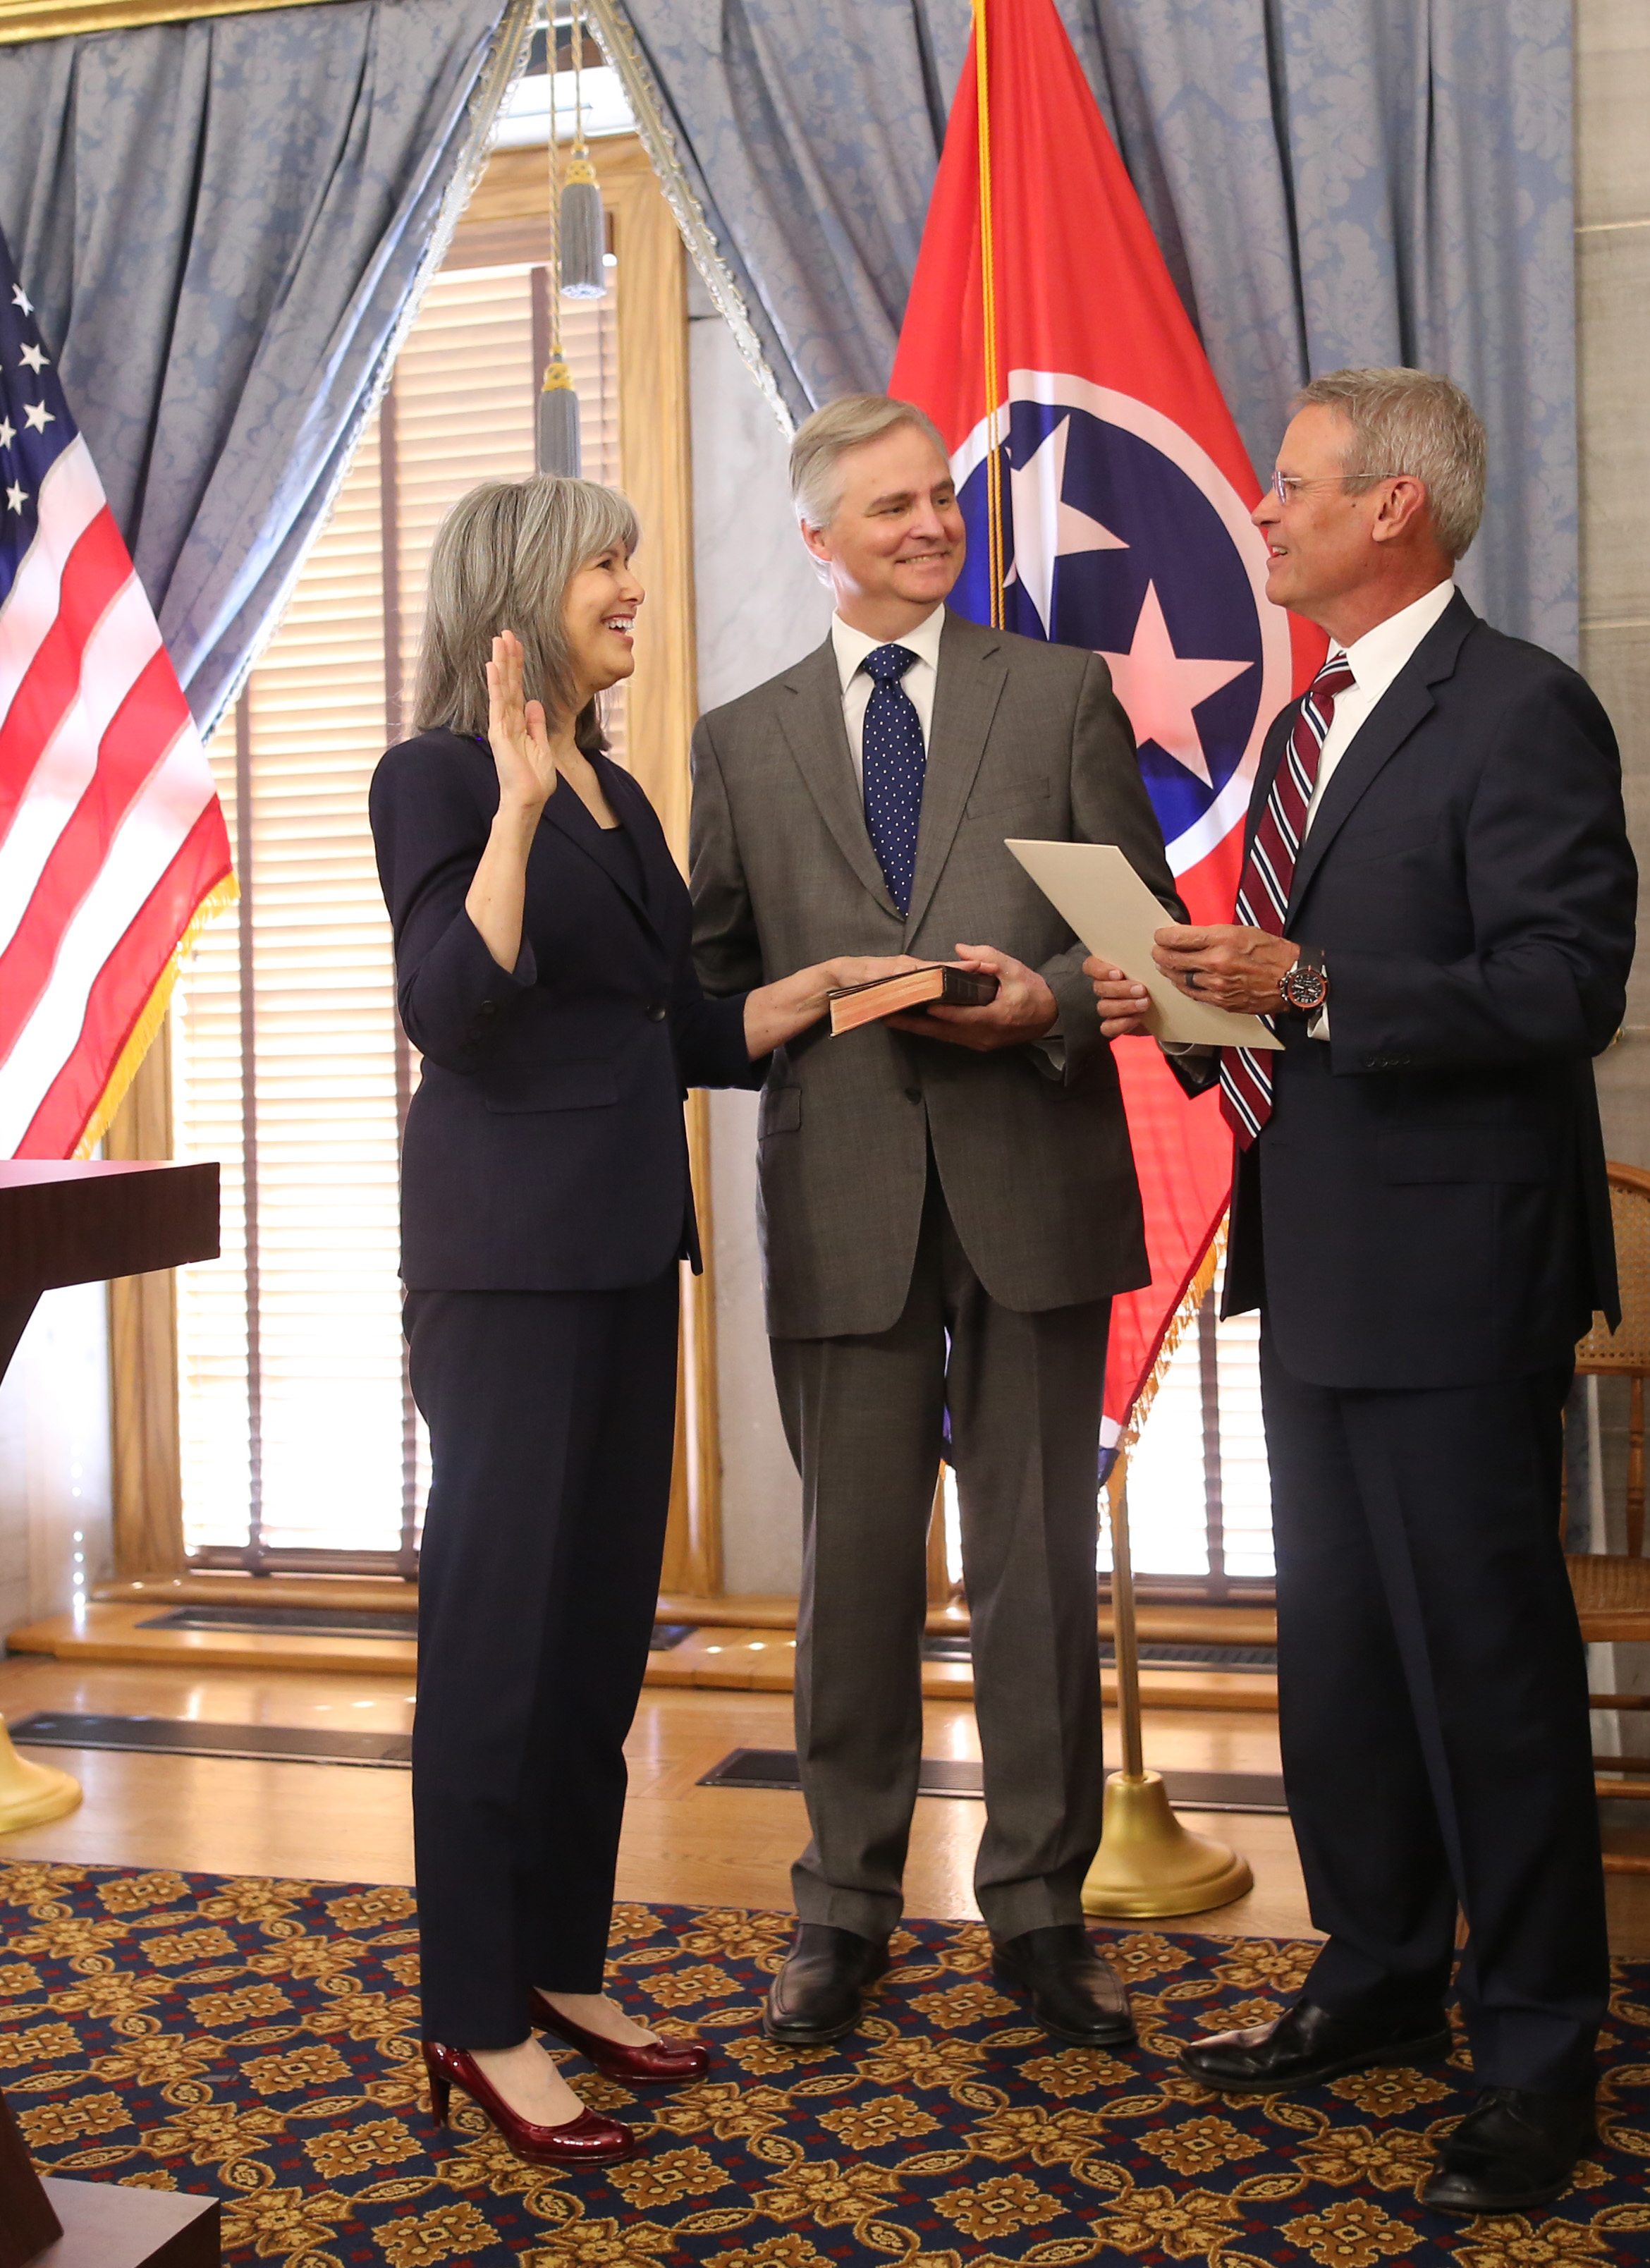 Justice Kirby takes the oath of office